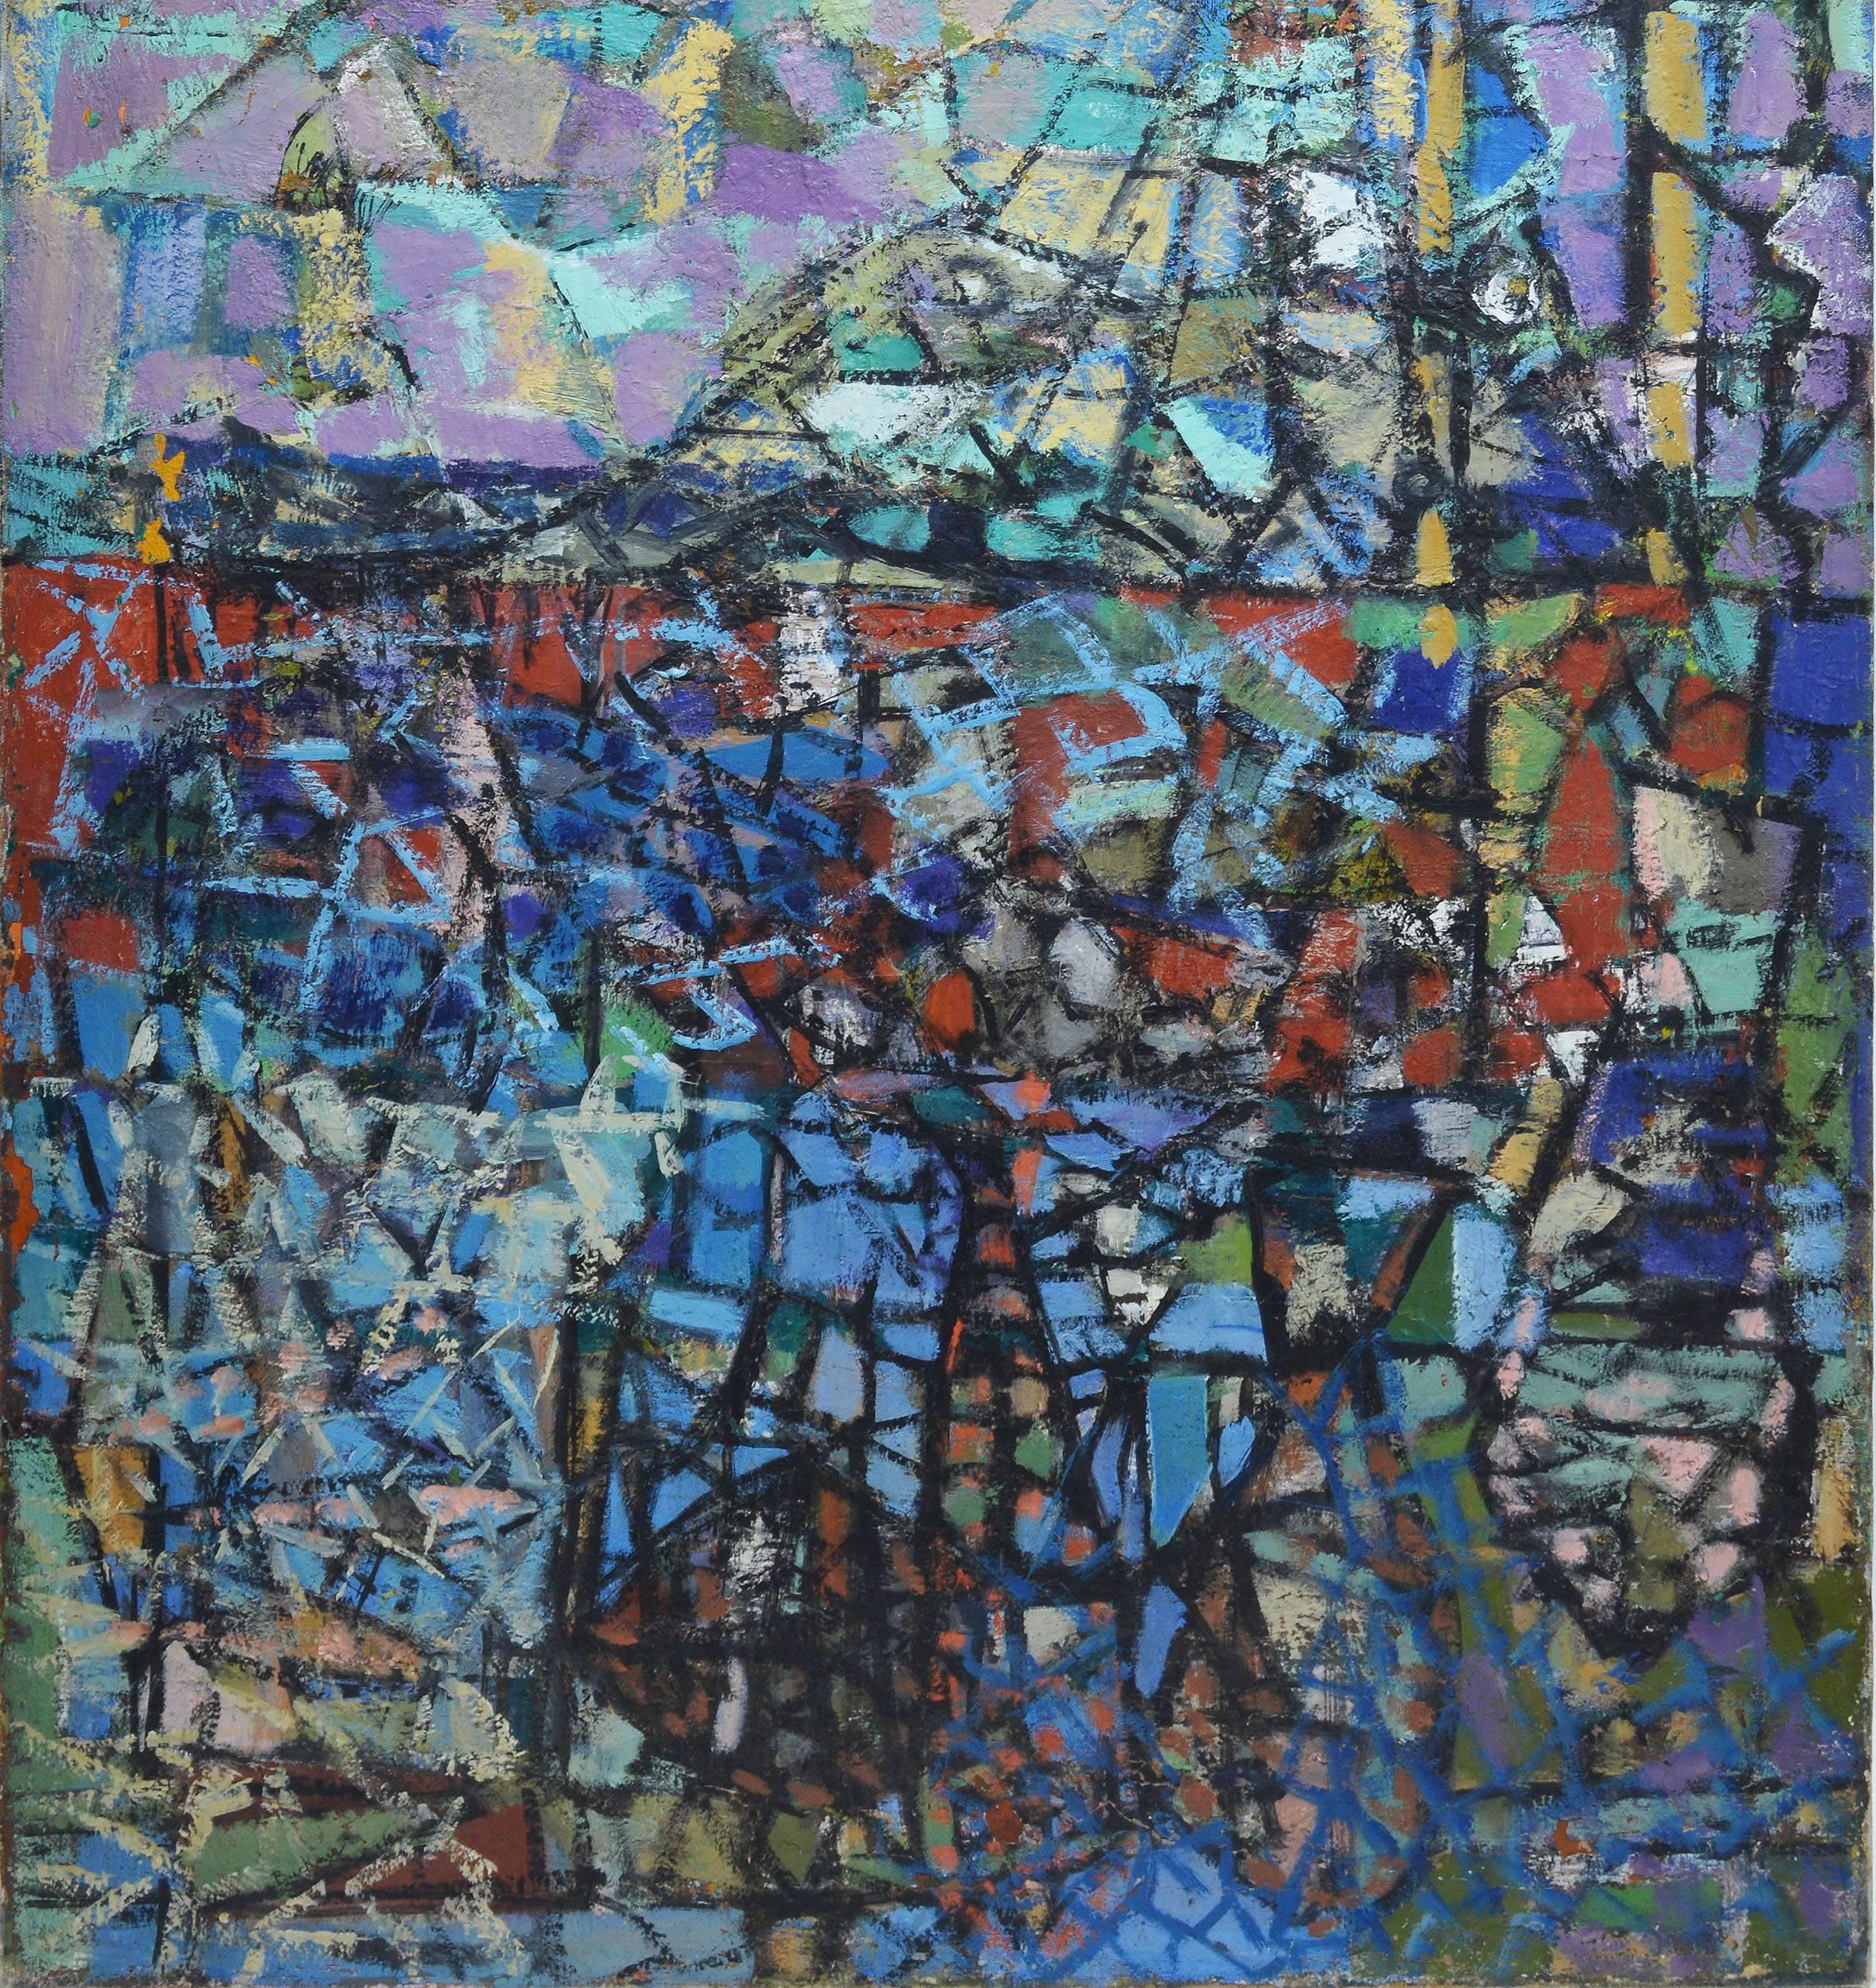 Abstract Harbor View - Gray Abstract Painting by Unknown